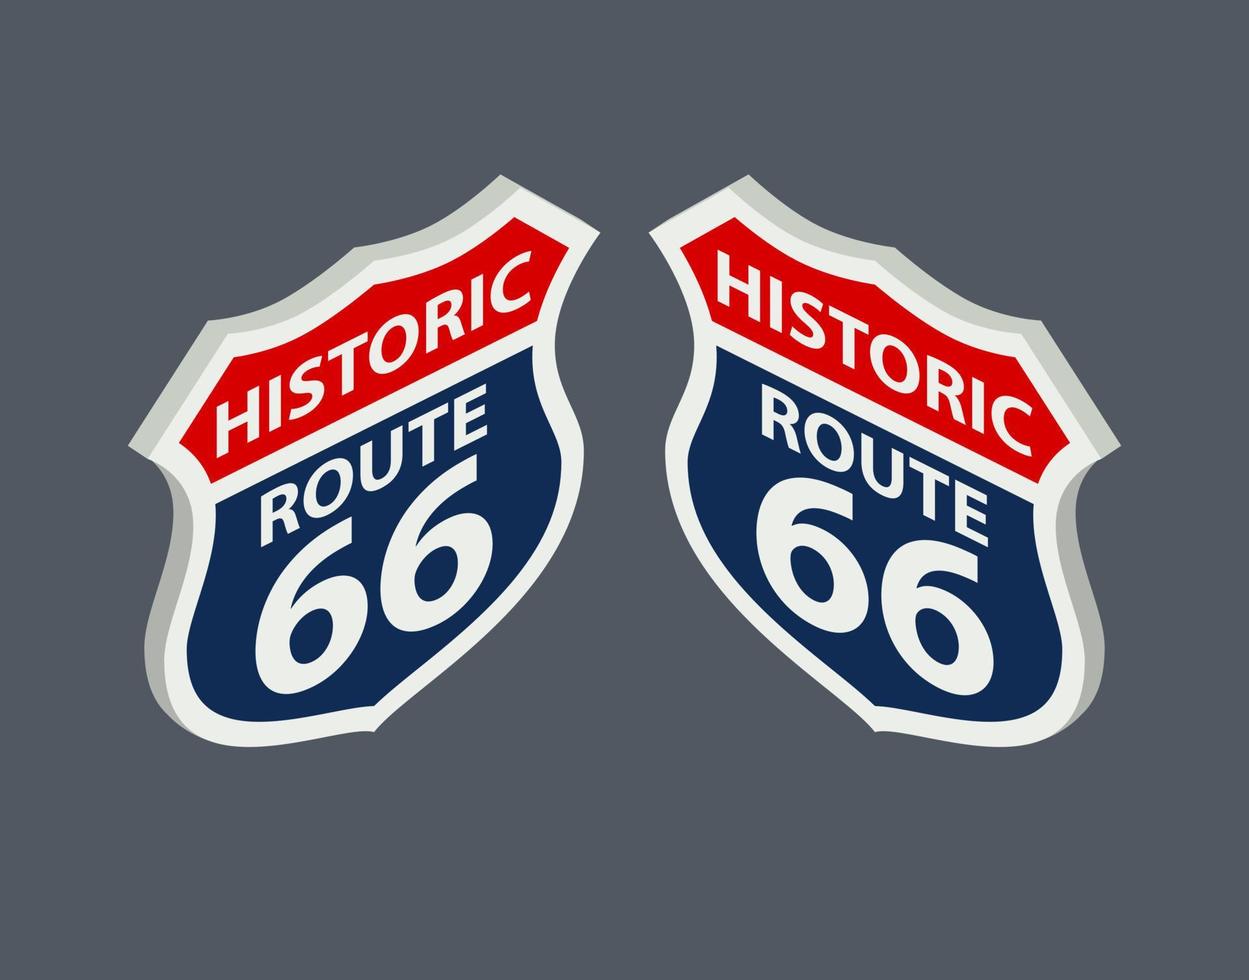 Historical signpost route 66 in isometry for the map. Vector illustration.